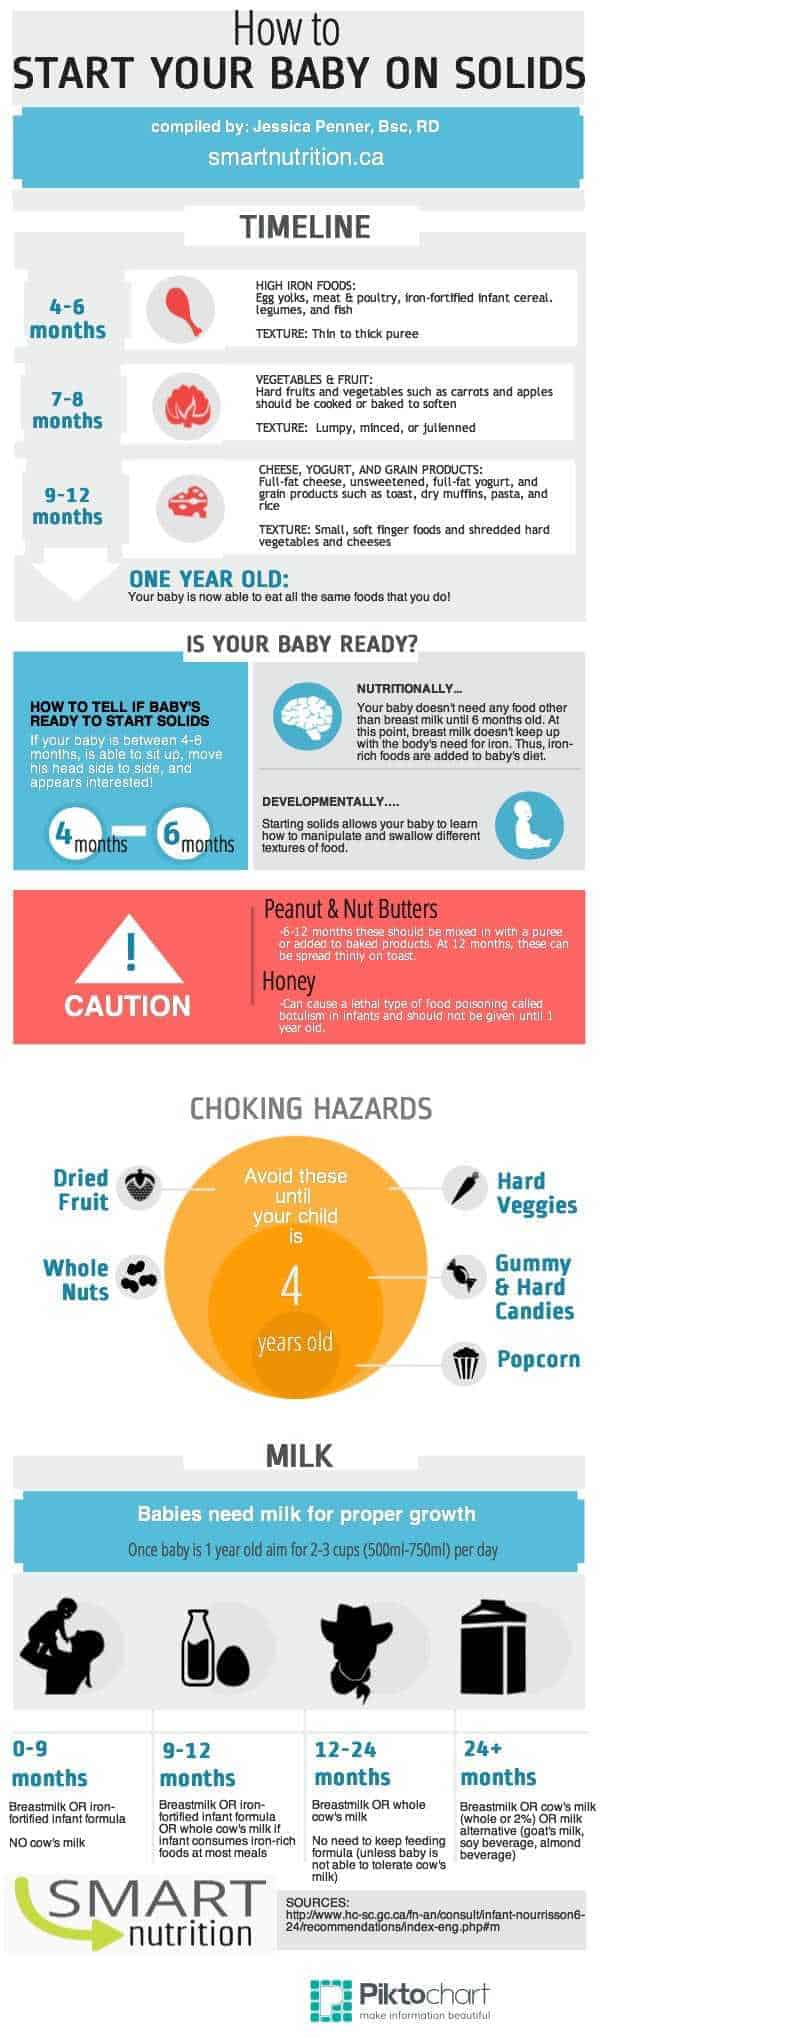 How to introduce solid food to a baby - infographic